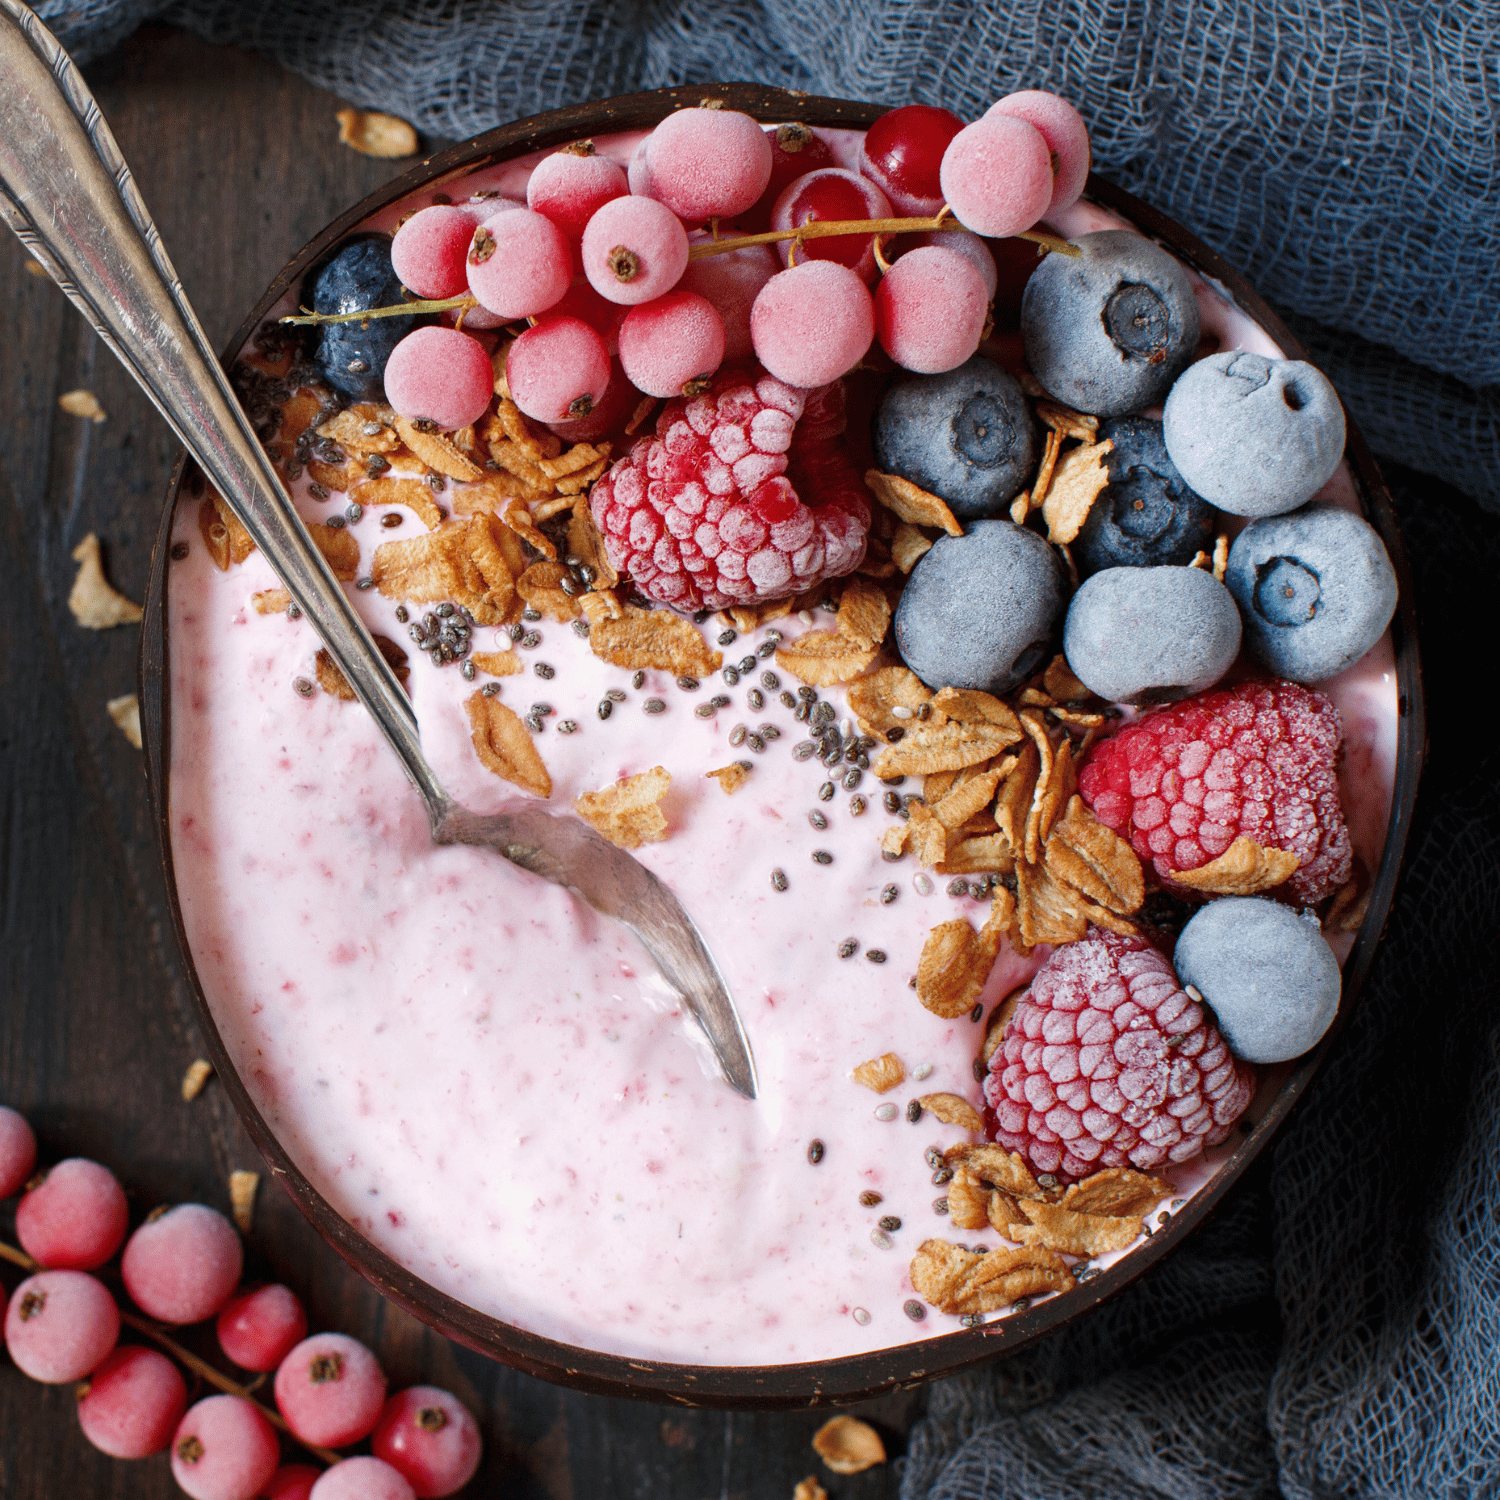 Antioxidant-Packed Berry Smoothie Bowl Recipe: A Refreshing Snack